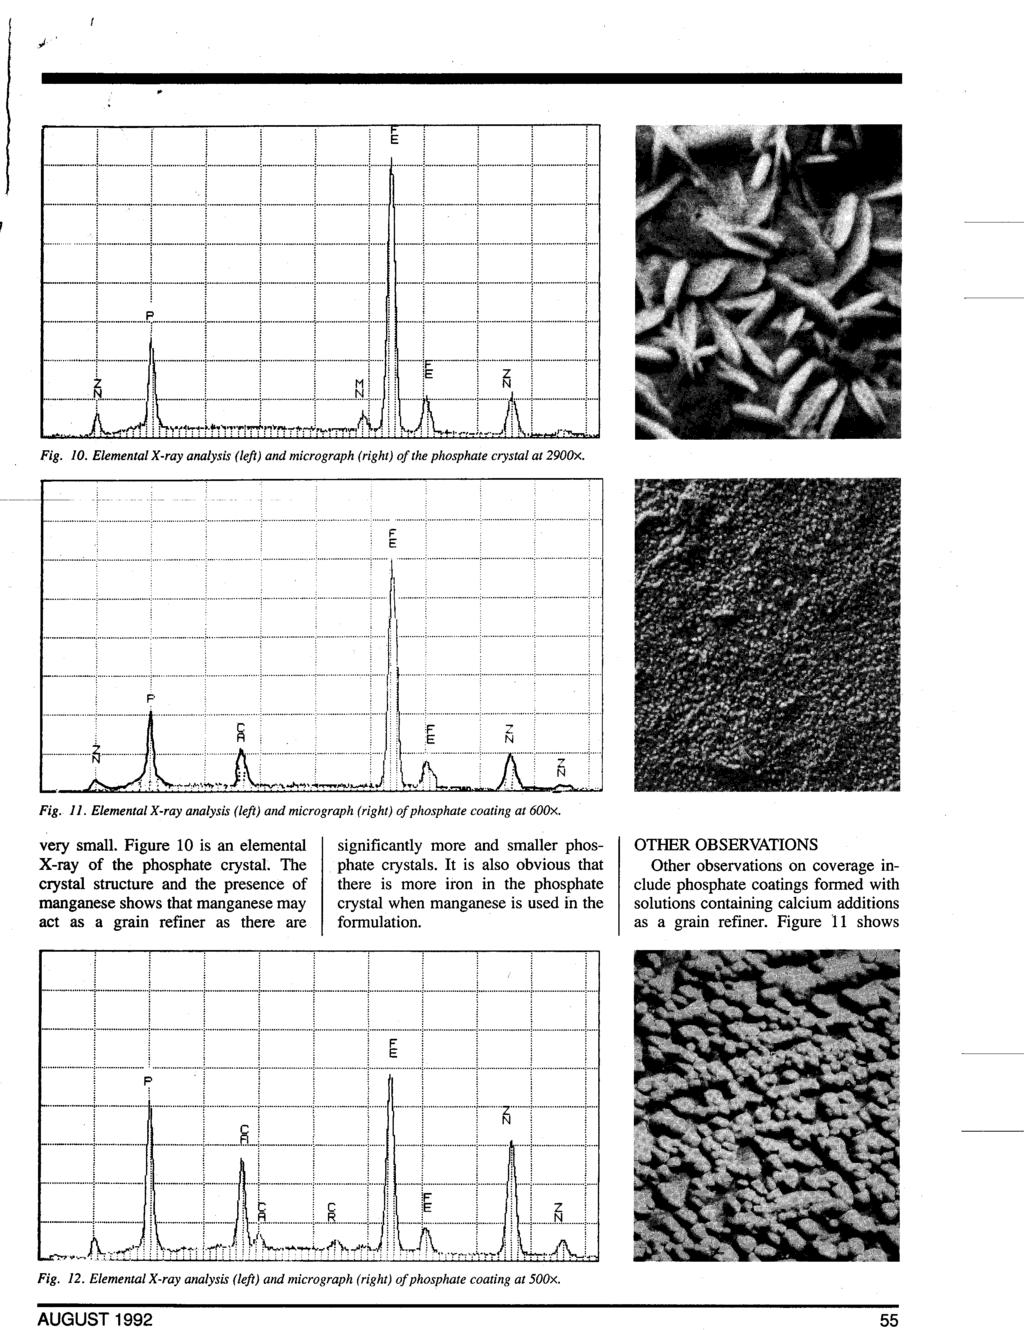 t AUGUST 1992 55 Fig. 10. Elemental X-ray analysis (left) and micrograph (right) of the phosphate crystal at 2900~. Fig. 11.